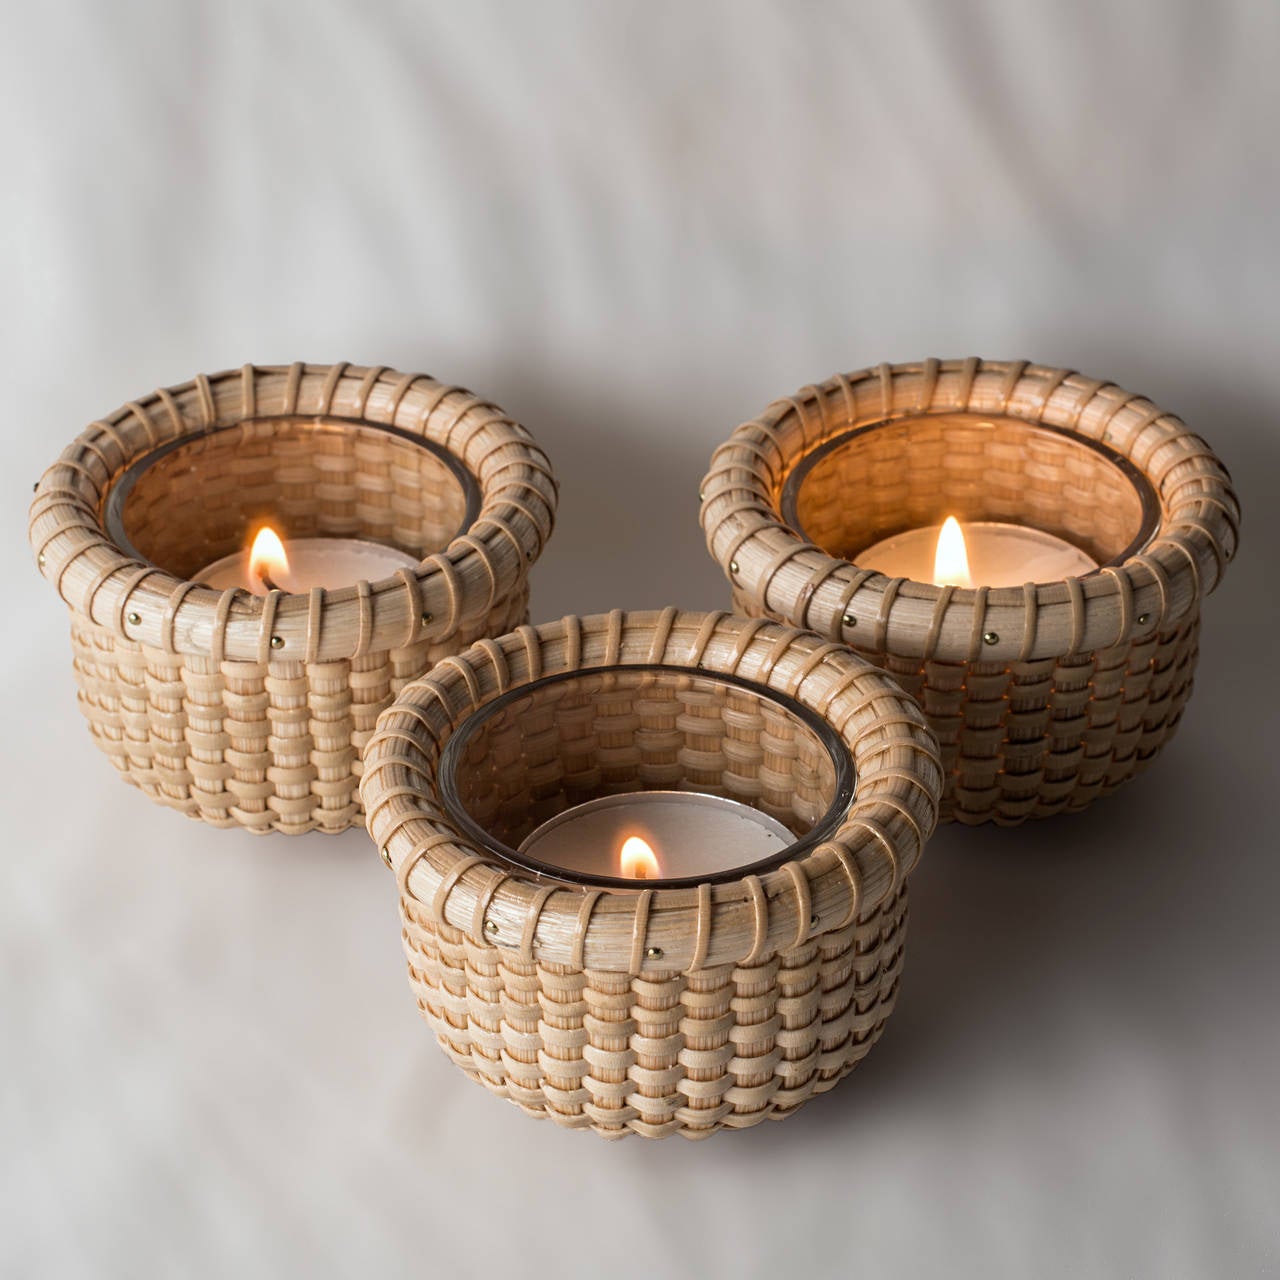 Nantucket Basket Tea Lights by Nick Blazensky with removable glass insert and sized perfectly for a small disposable tea light.

Diameter 3 inches, Height 1.75 inches